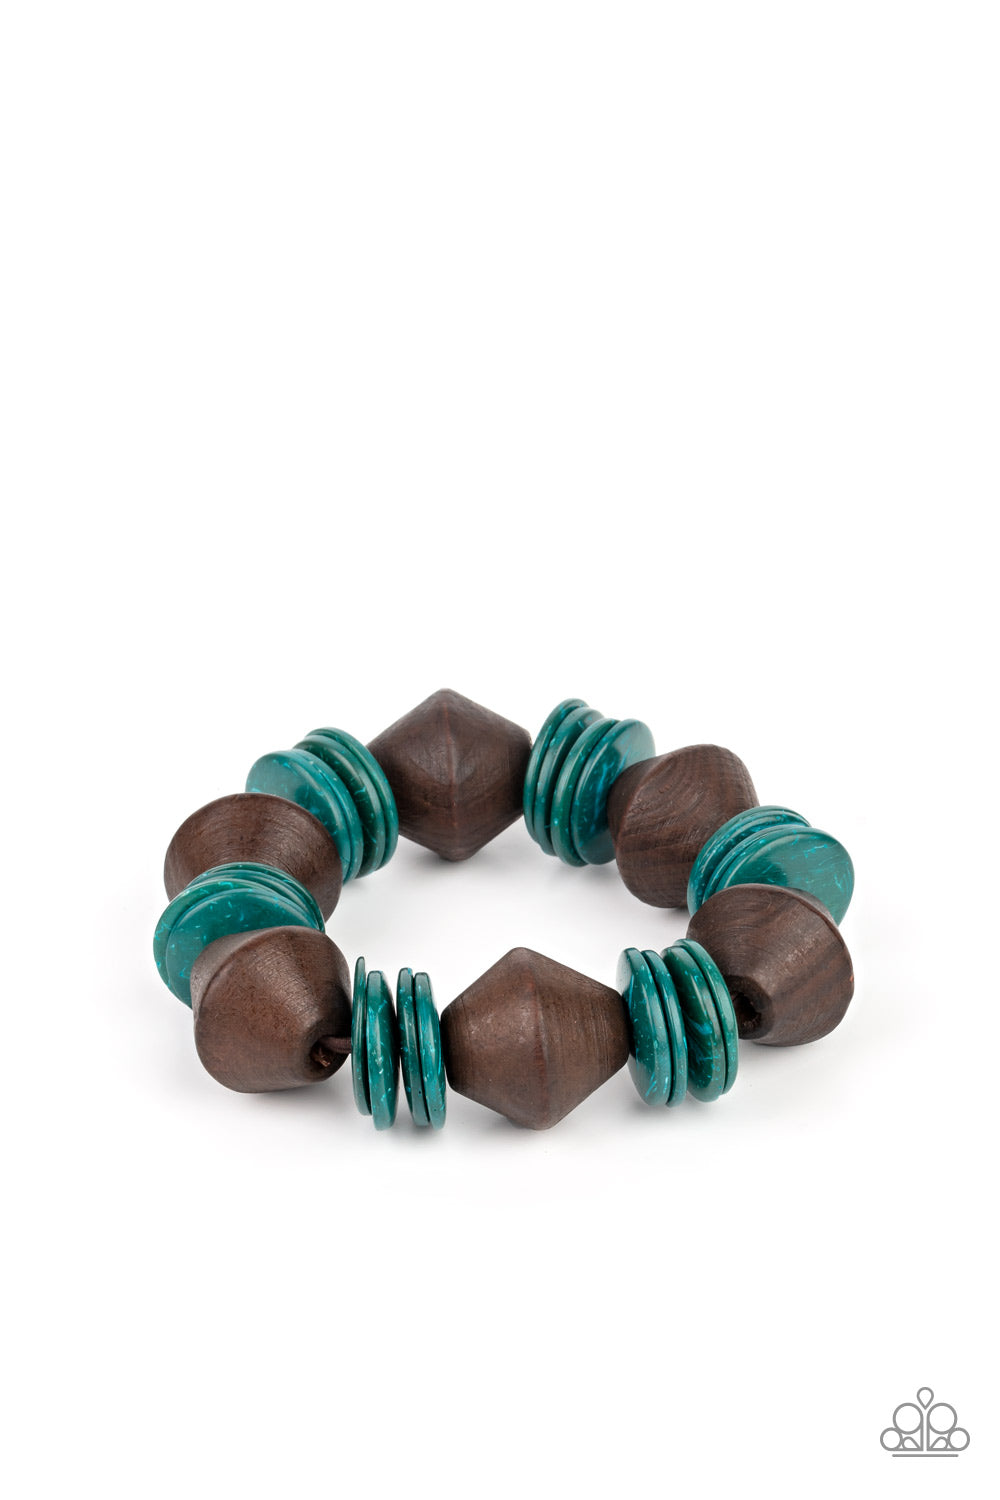 Wooden bracelet with blue accents. Blue wooden discs and chunky brown wooden beads are threaded along a stretchy band around the wrist, creating a summery look.